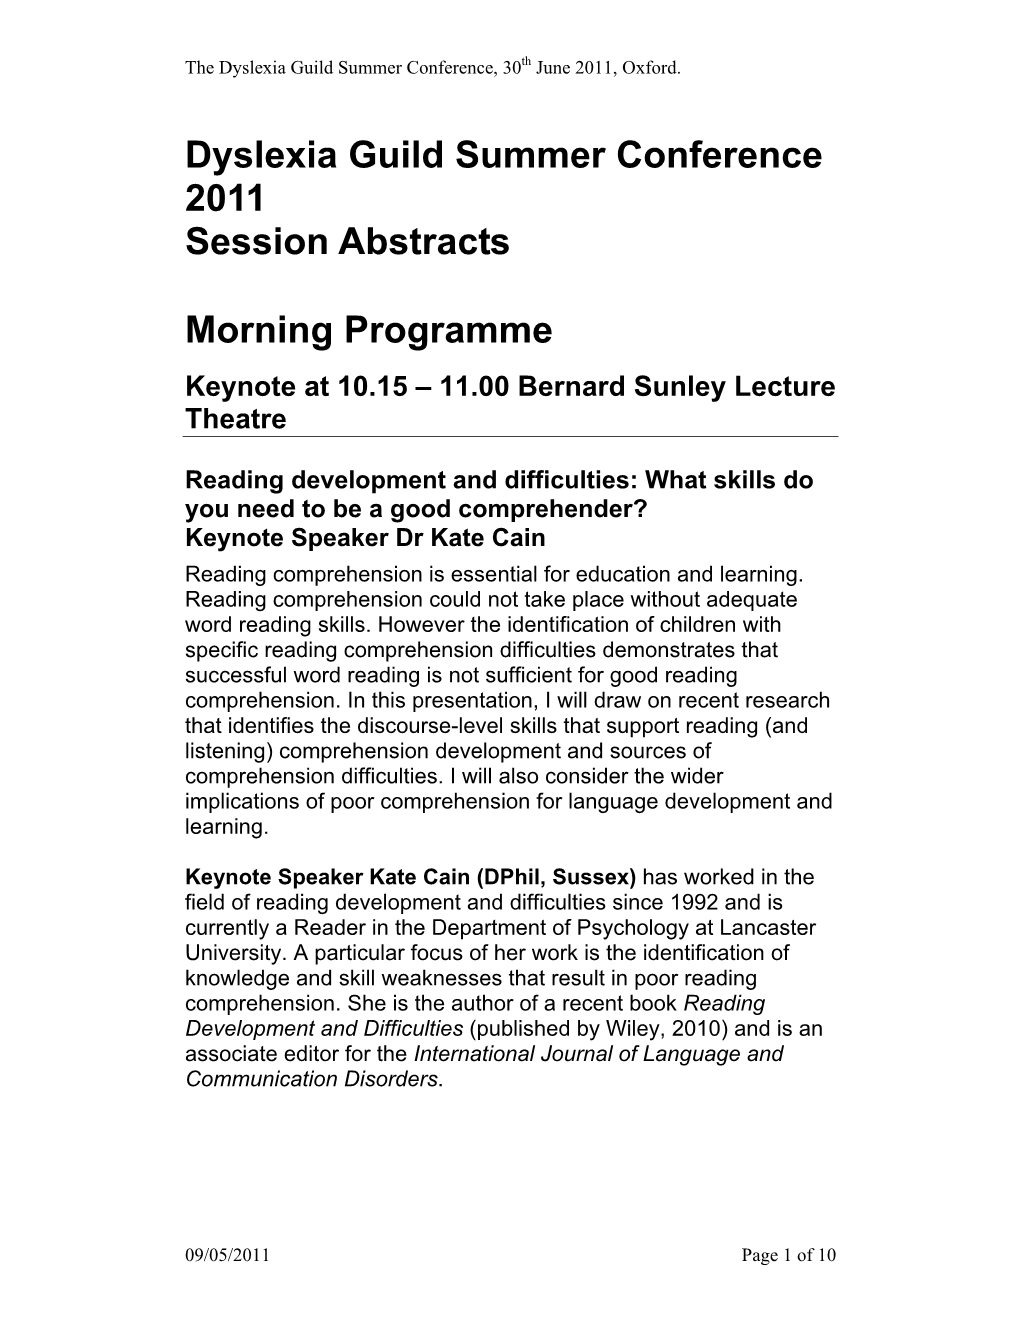 Dyslexia Guild Summer Conference 2011 Session Abstracts